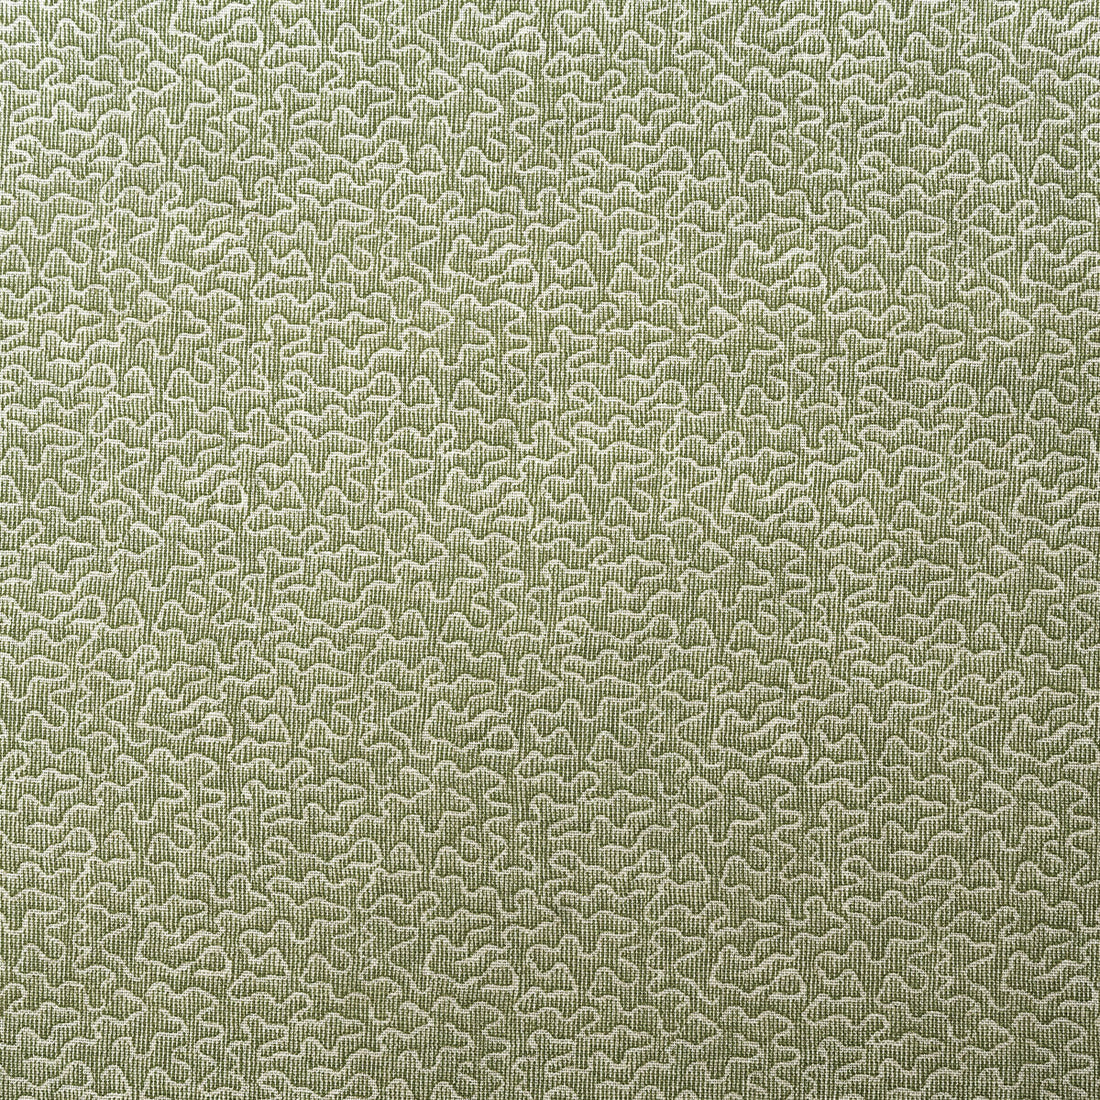 Pollen fabric in leaf color - pattern AM100383.3.0 - by Kravet Couture in the Andrew Martin Garden Path collection